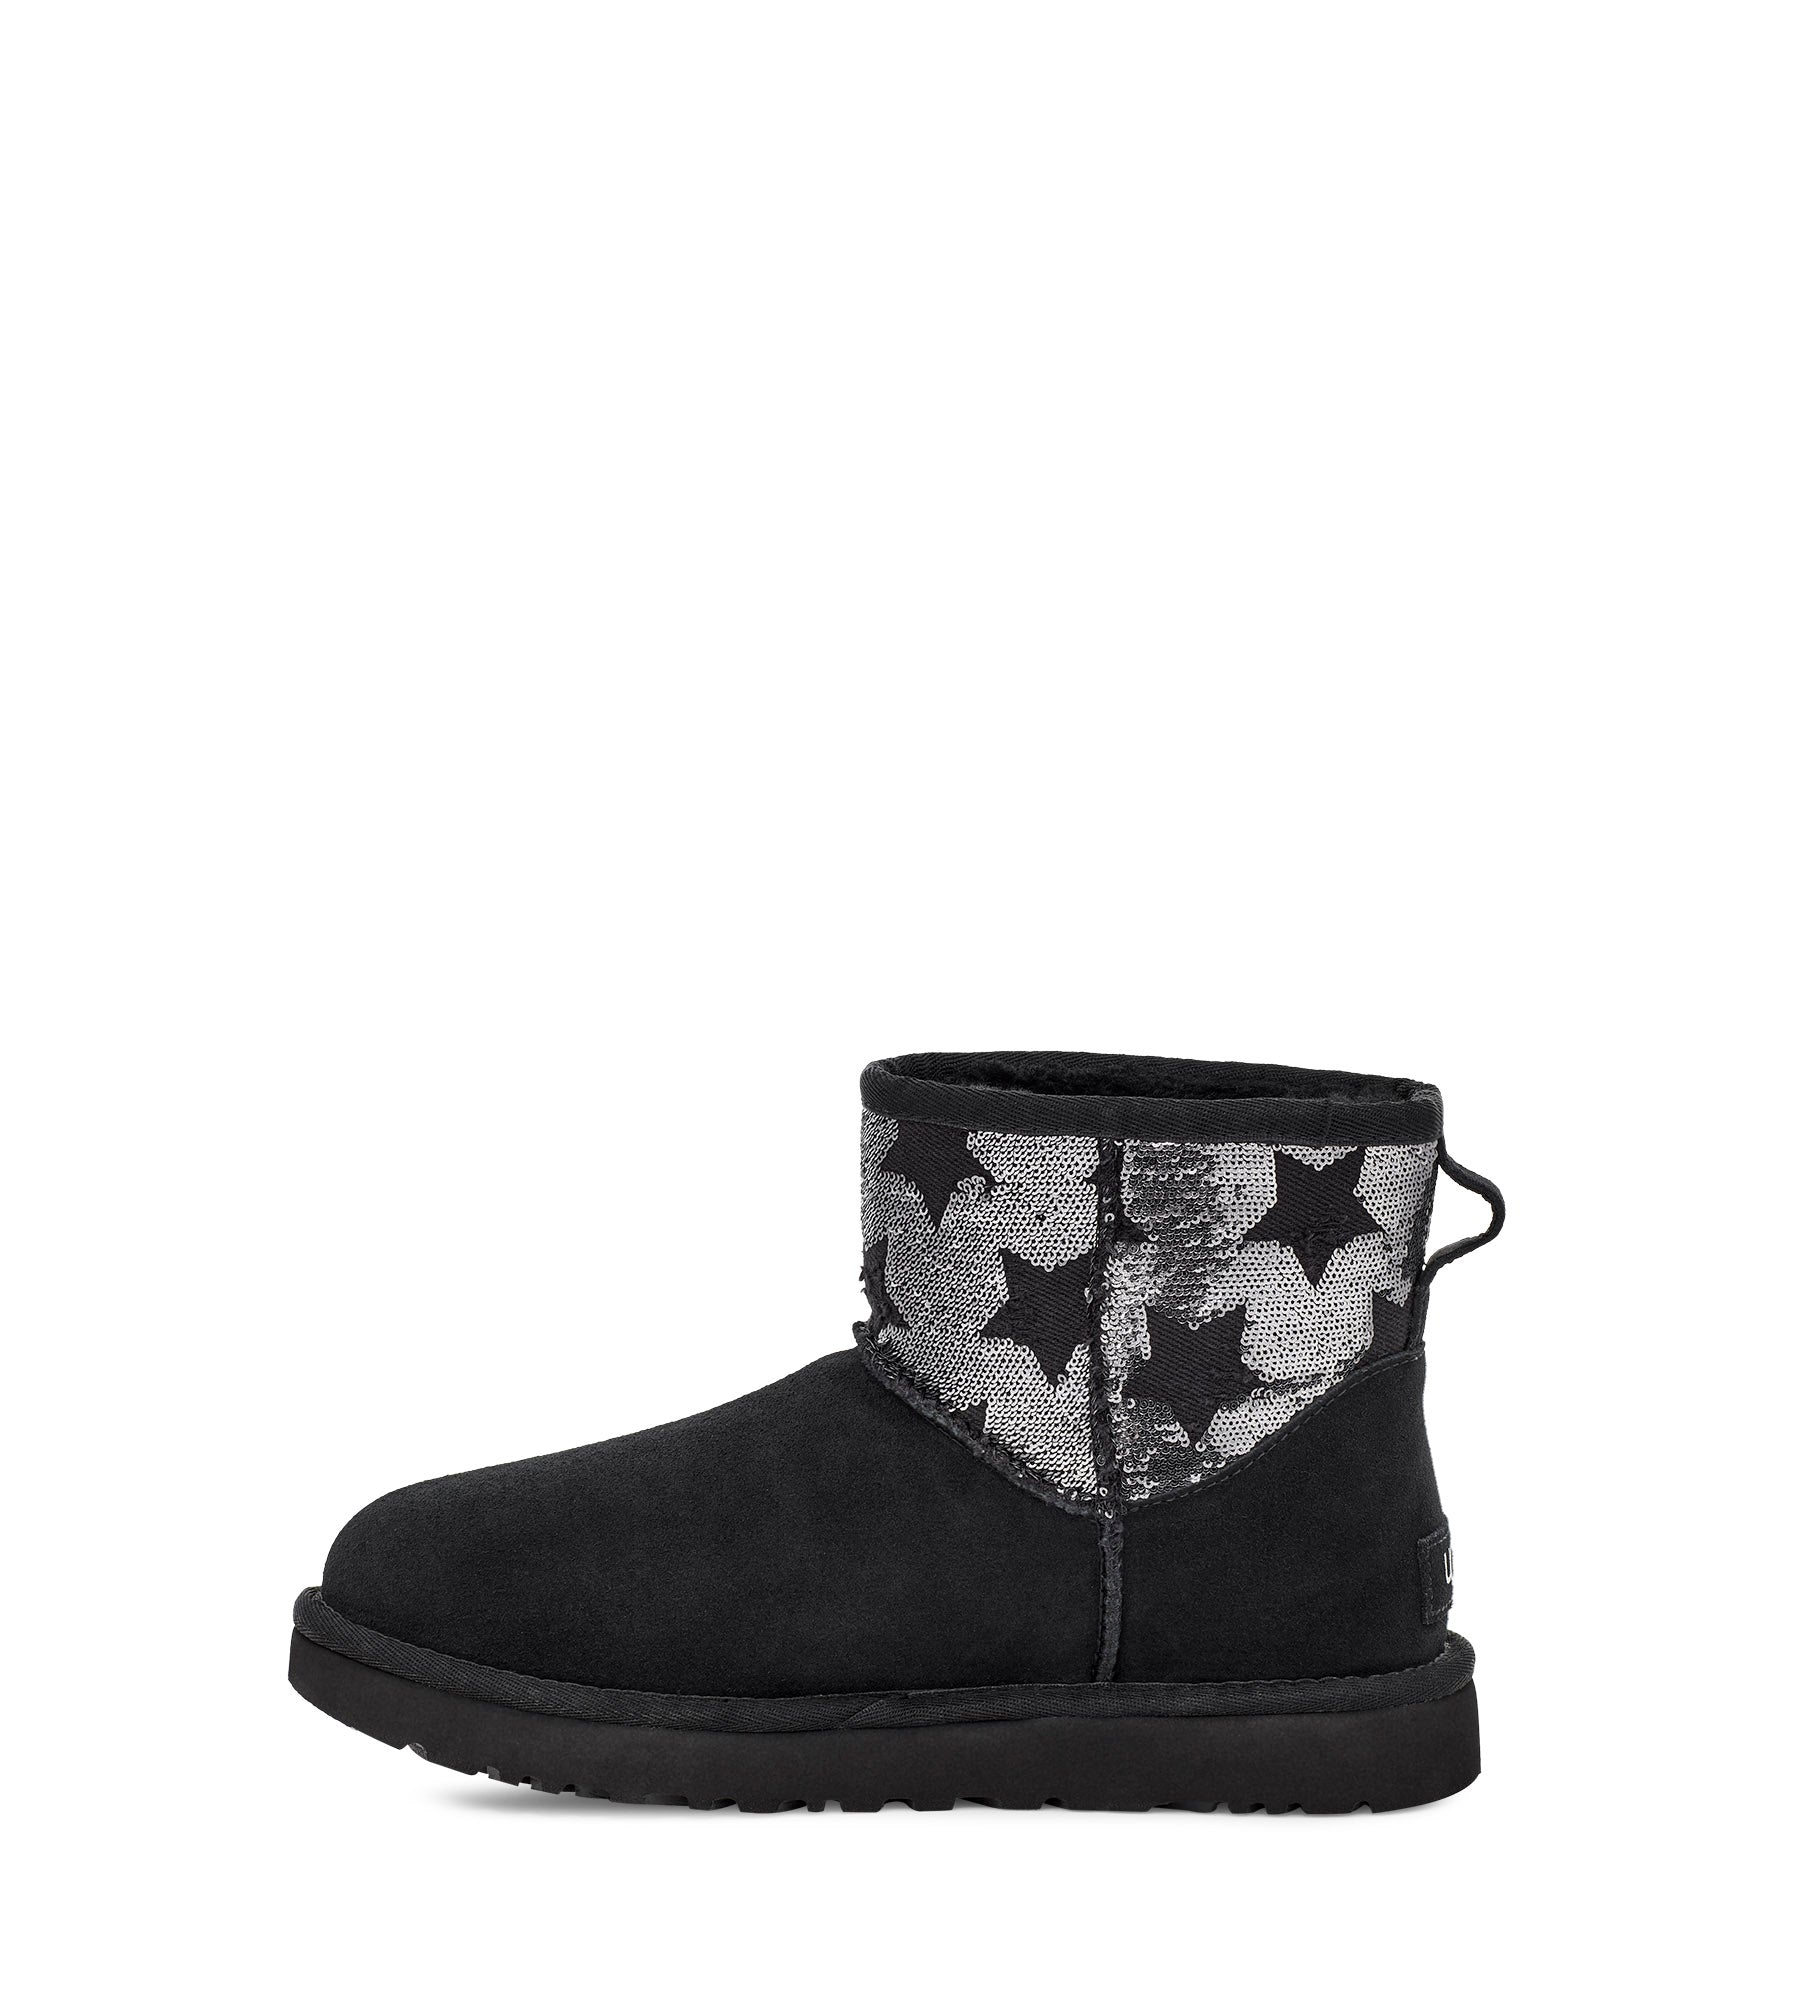 Spike studed uggs  Ugg boots outlets, Boots, Cheap ugg boots outlet